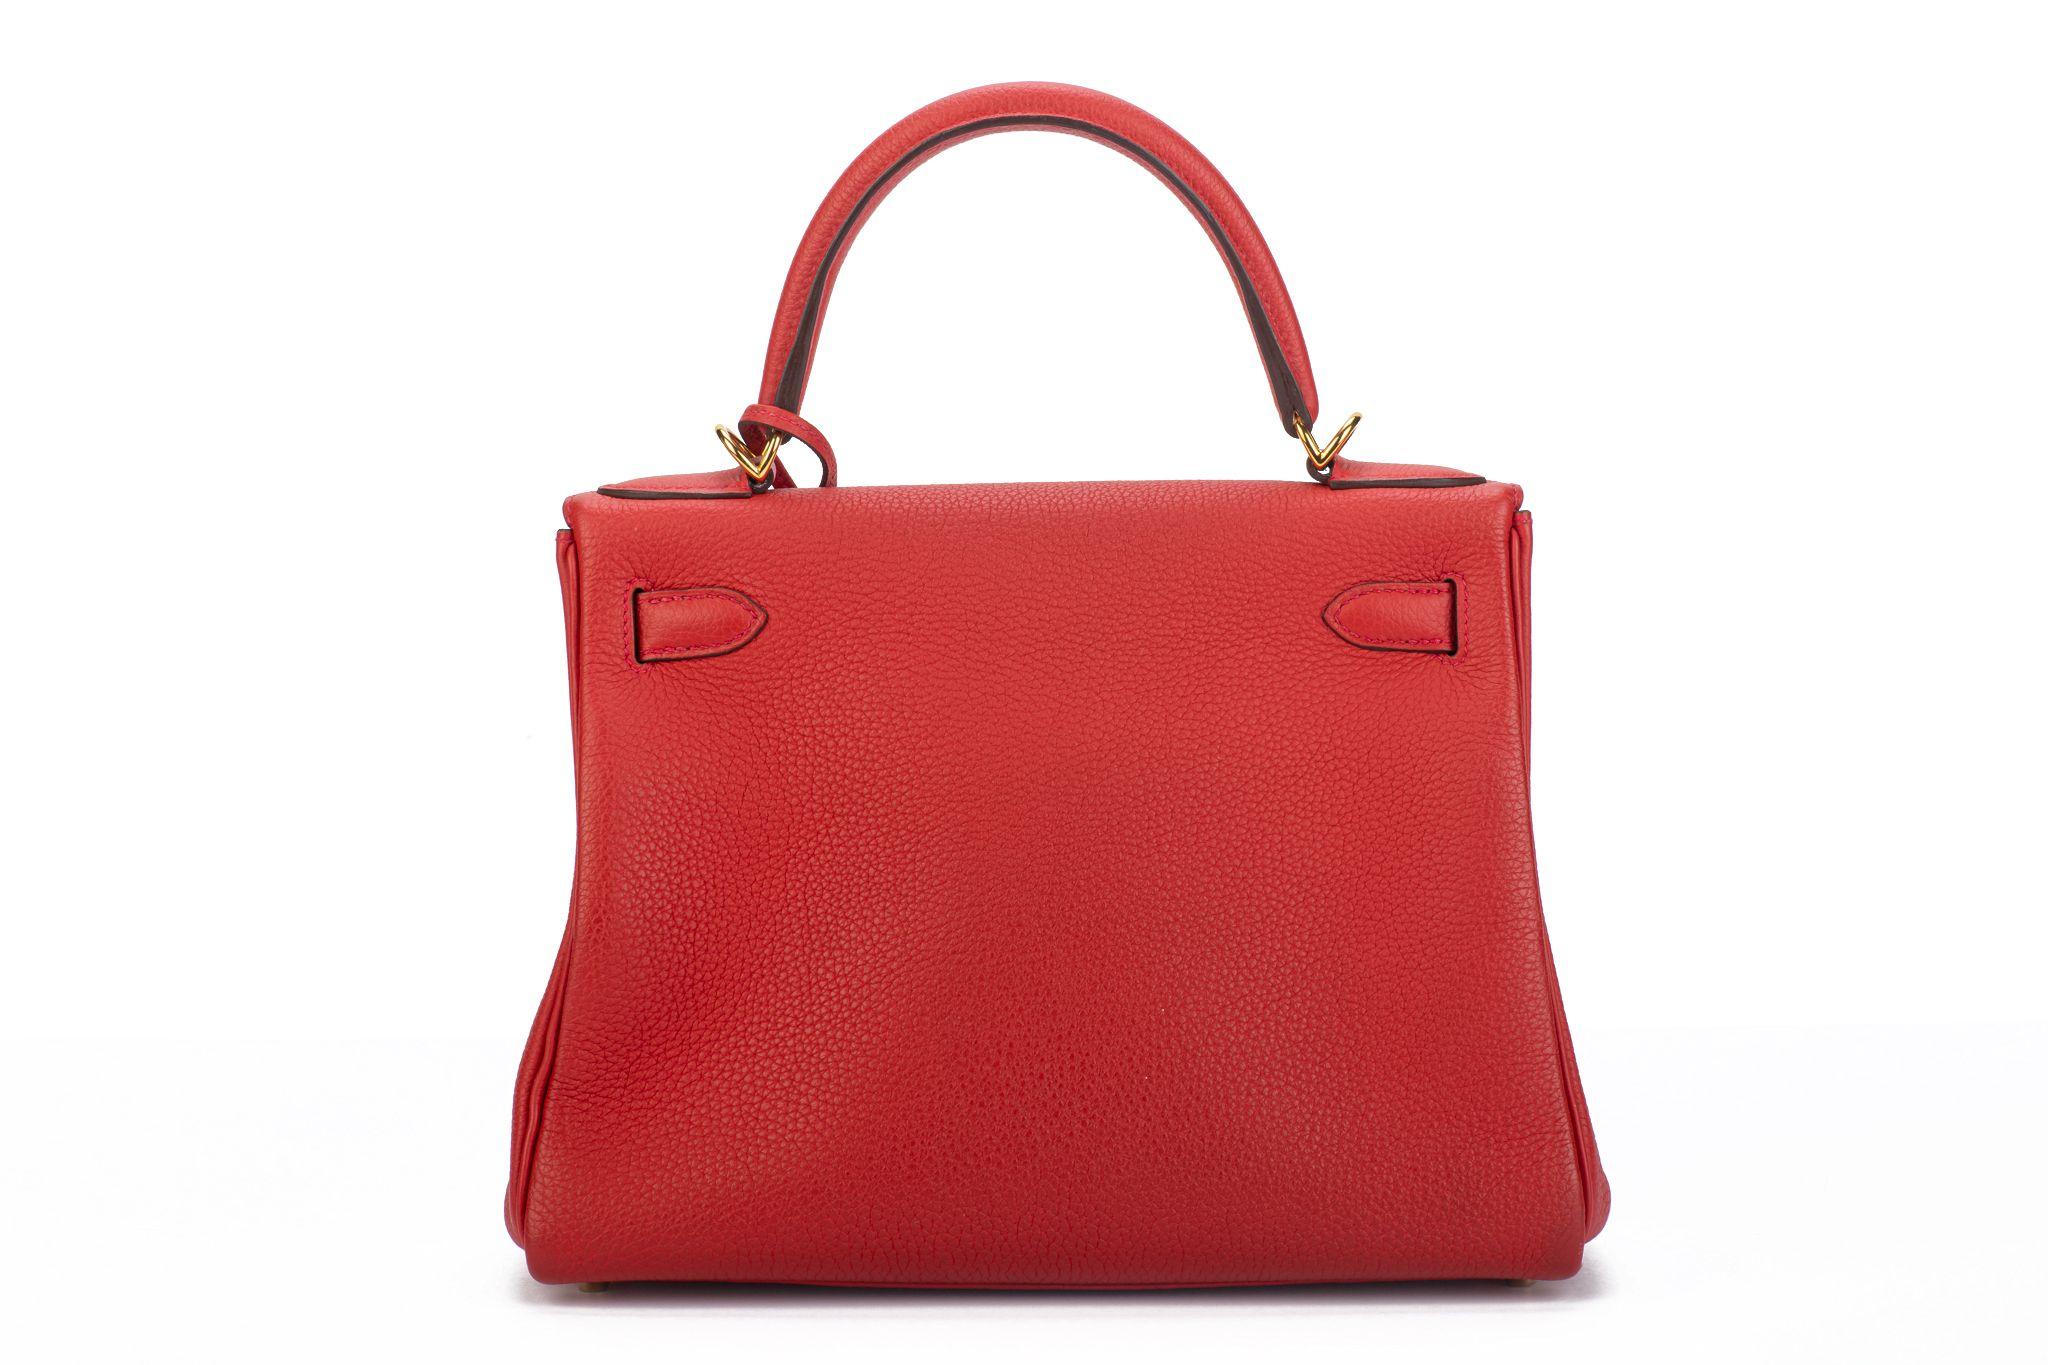 Hermès Kelly Retourne 28 Geranium Togo In Excellent Condition For Sale In West Hollywood, CA